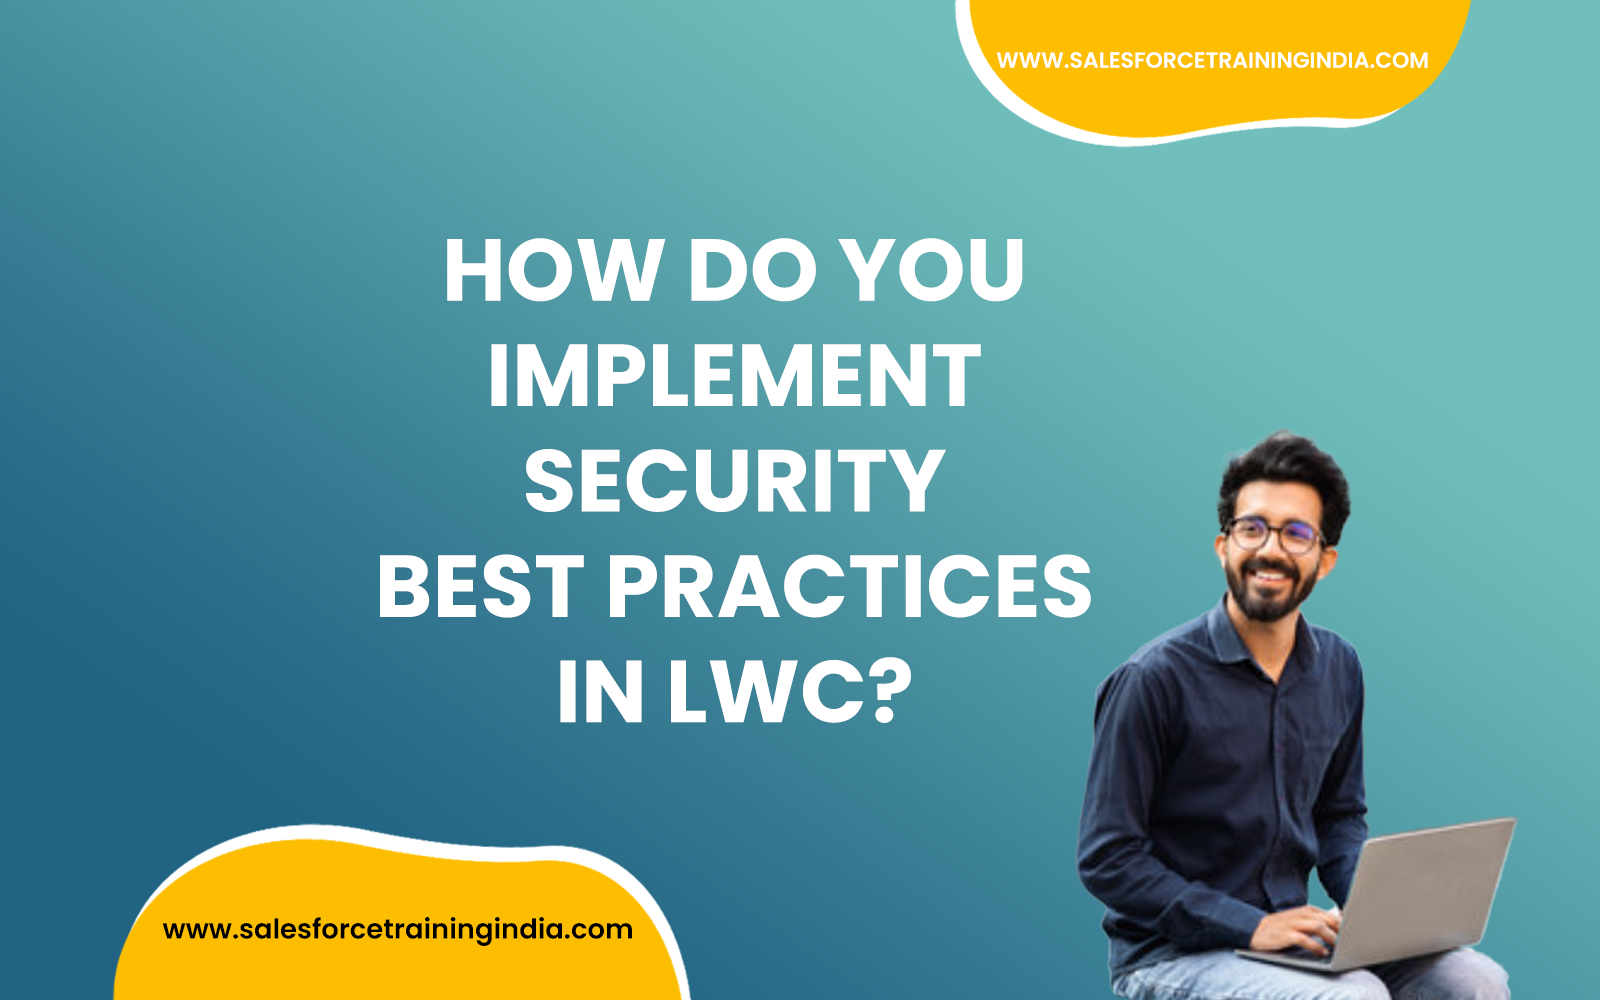 How do you implement security Best practices in LWC?